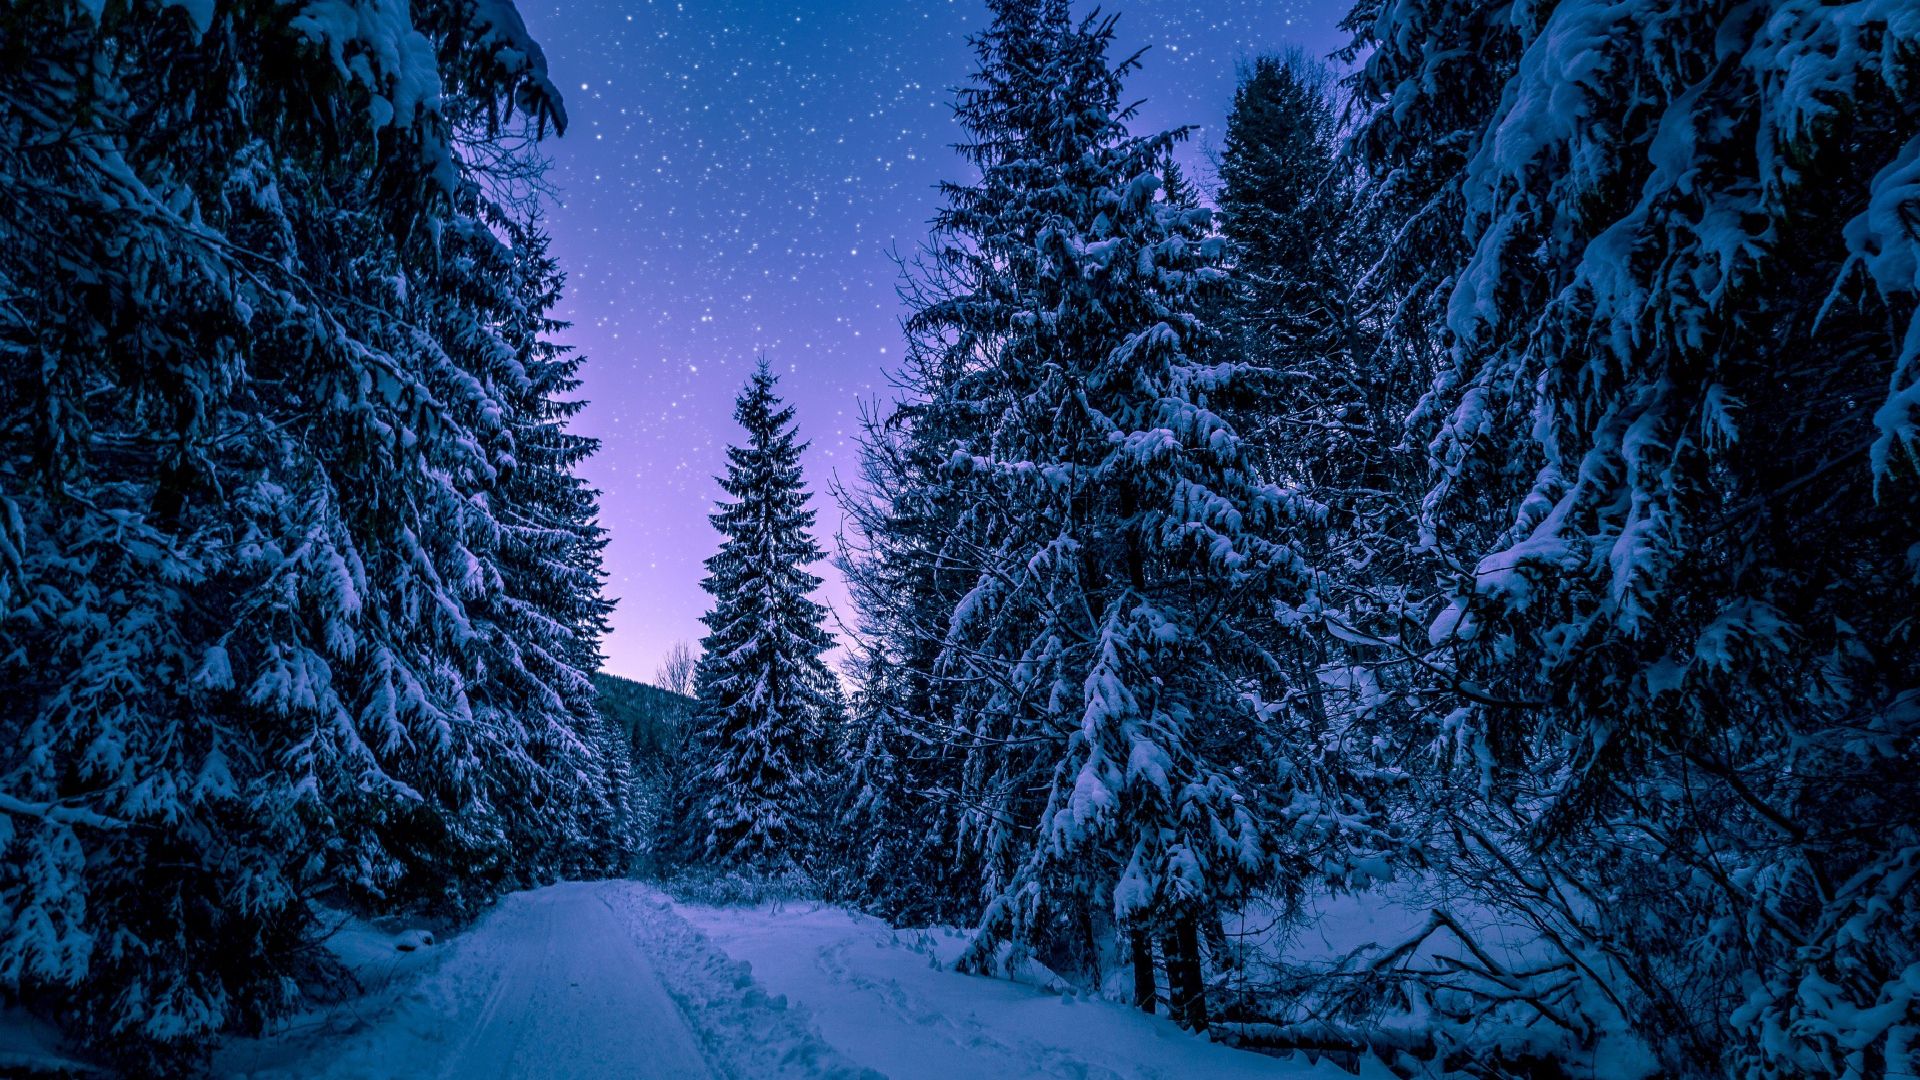 Fir Tree Forest, Snow, Winter, Night Wallpaper Image High Quality